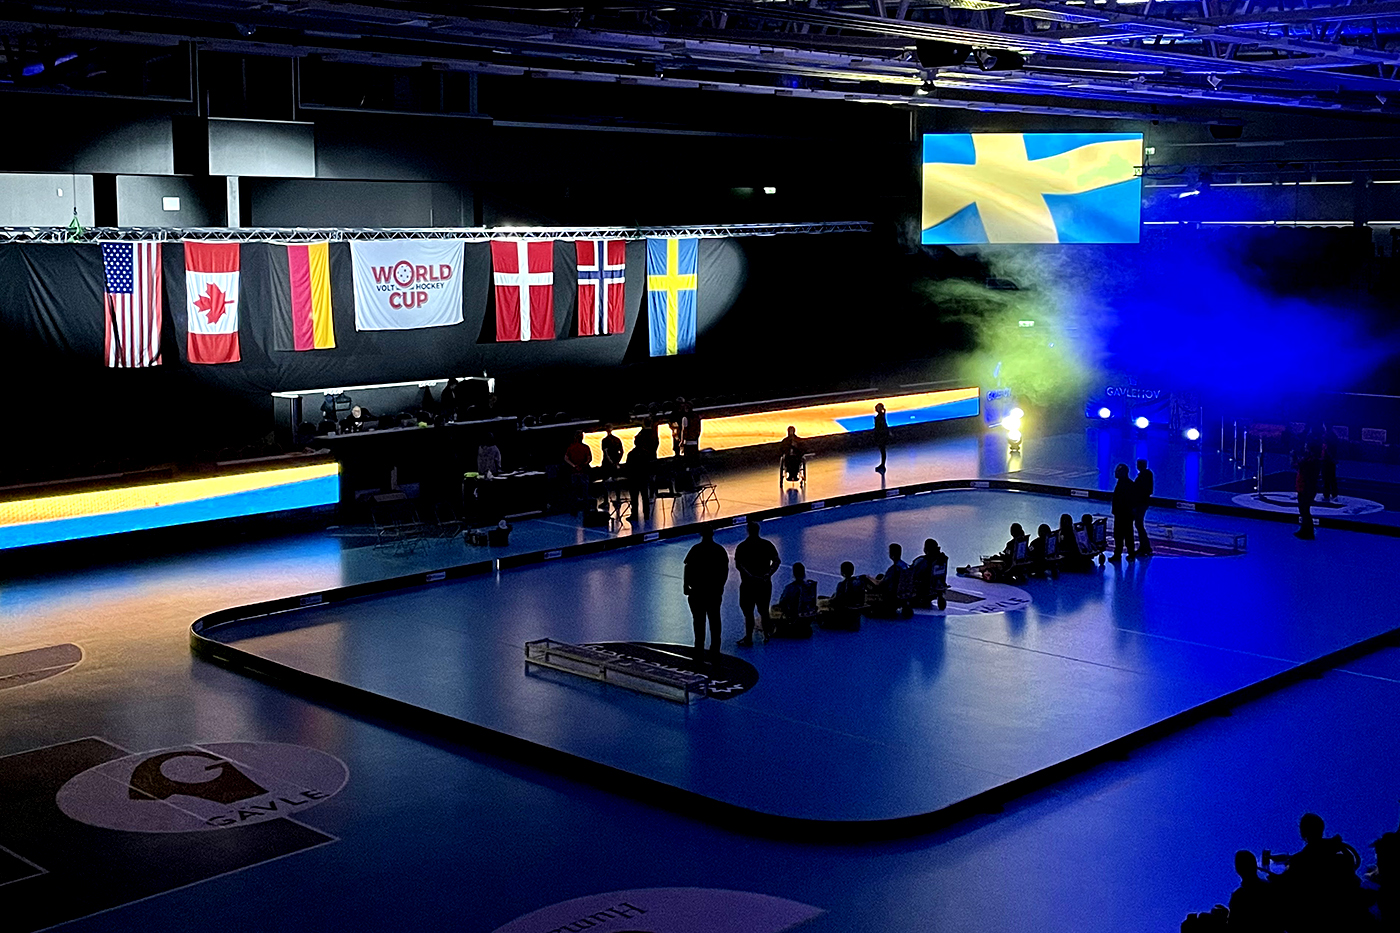 World flags are illuminated over a dark court at the Volt hockey world cup